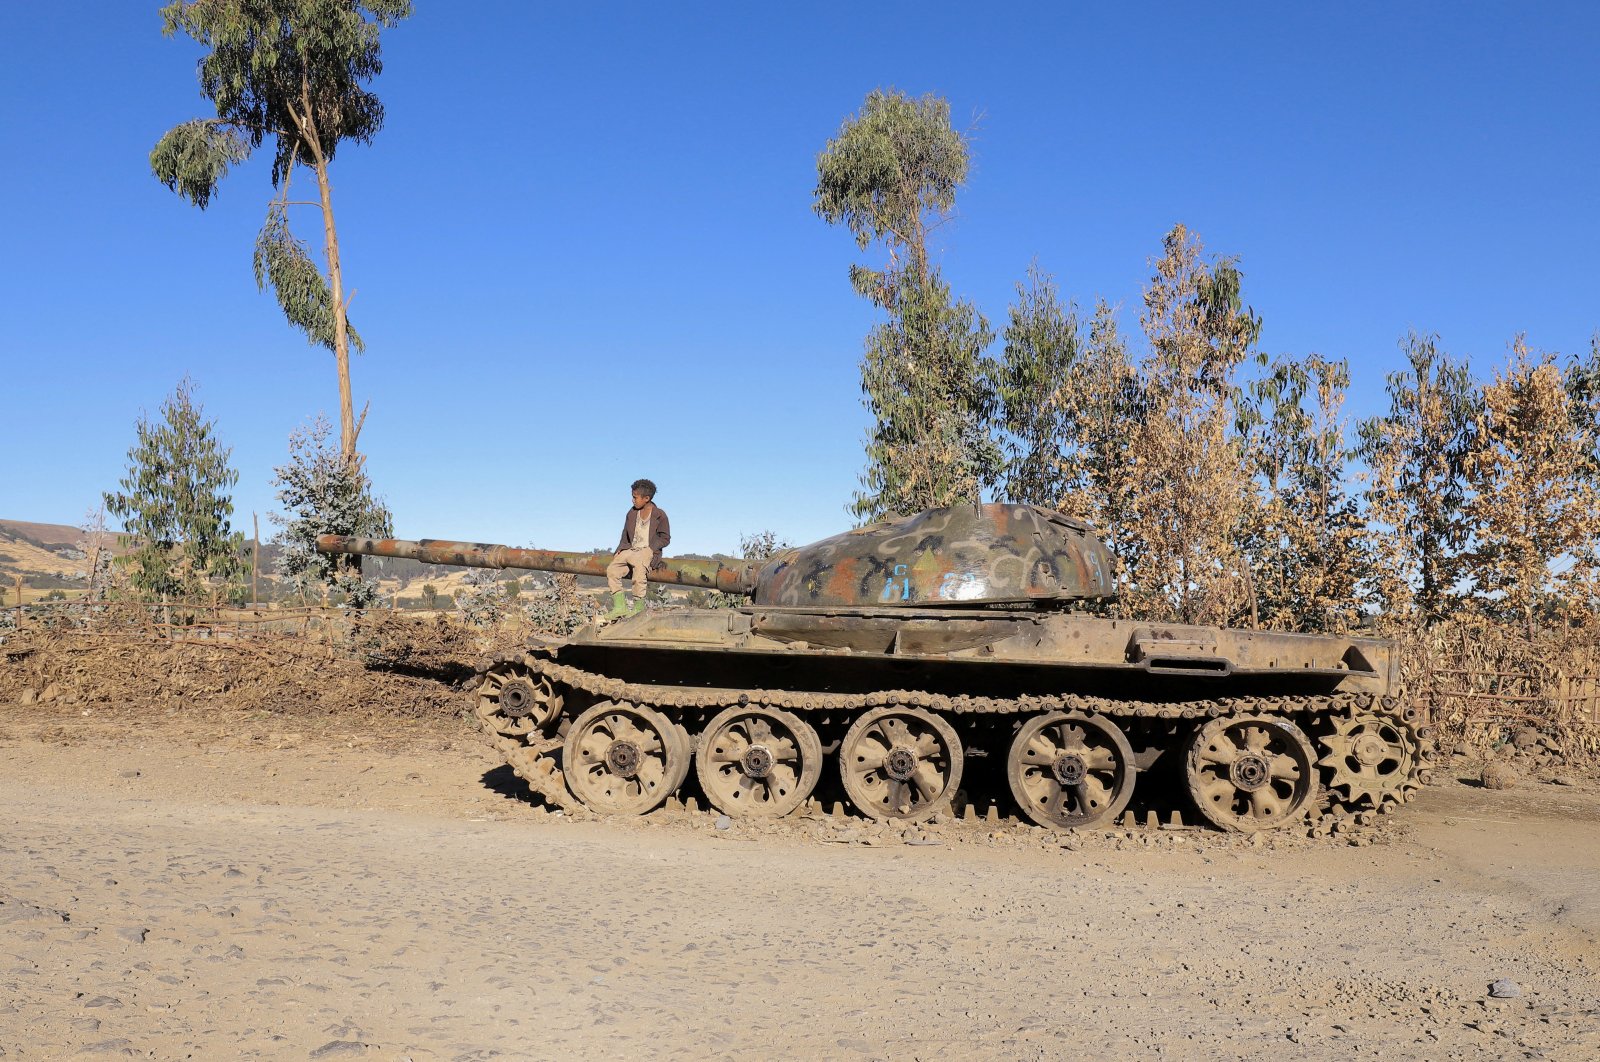 A boy sits on the barrel of a military tank destroyed recently during fighting between the Ethiopian National Defense Force (ENDF) and the Tigray People&#039;s Liberation Front (TPLF) forces in Damot Kebele of Amhara region, Ethiopia, Dec. 7, 2021. (Reuters Photo)